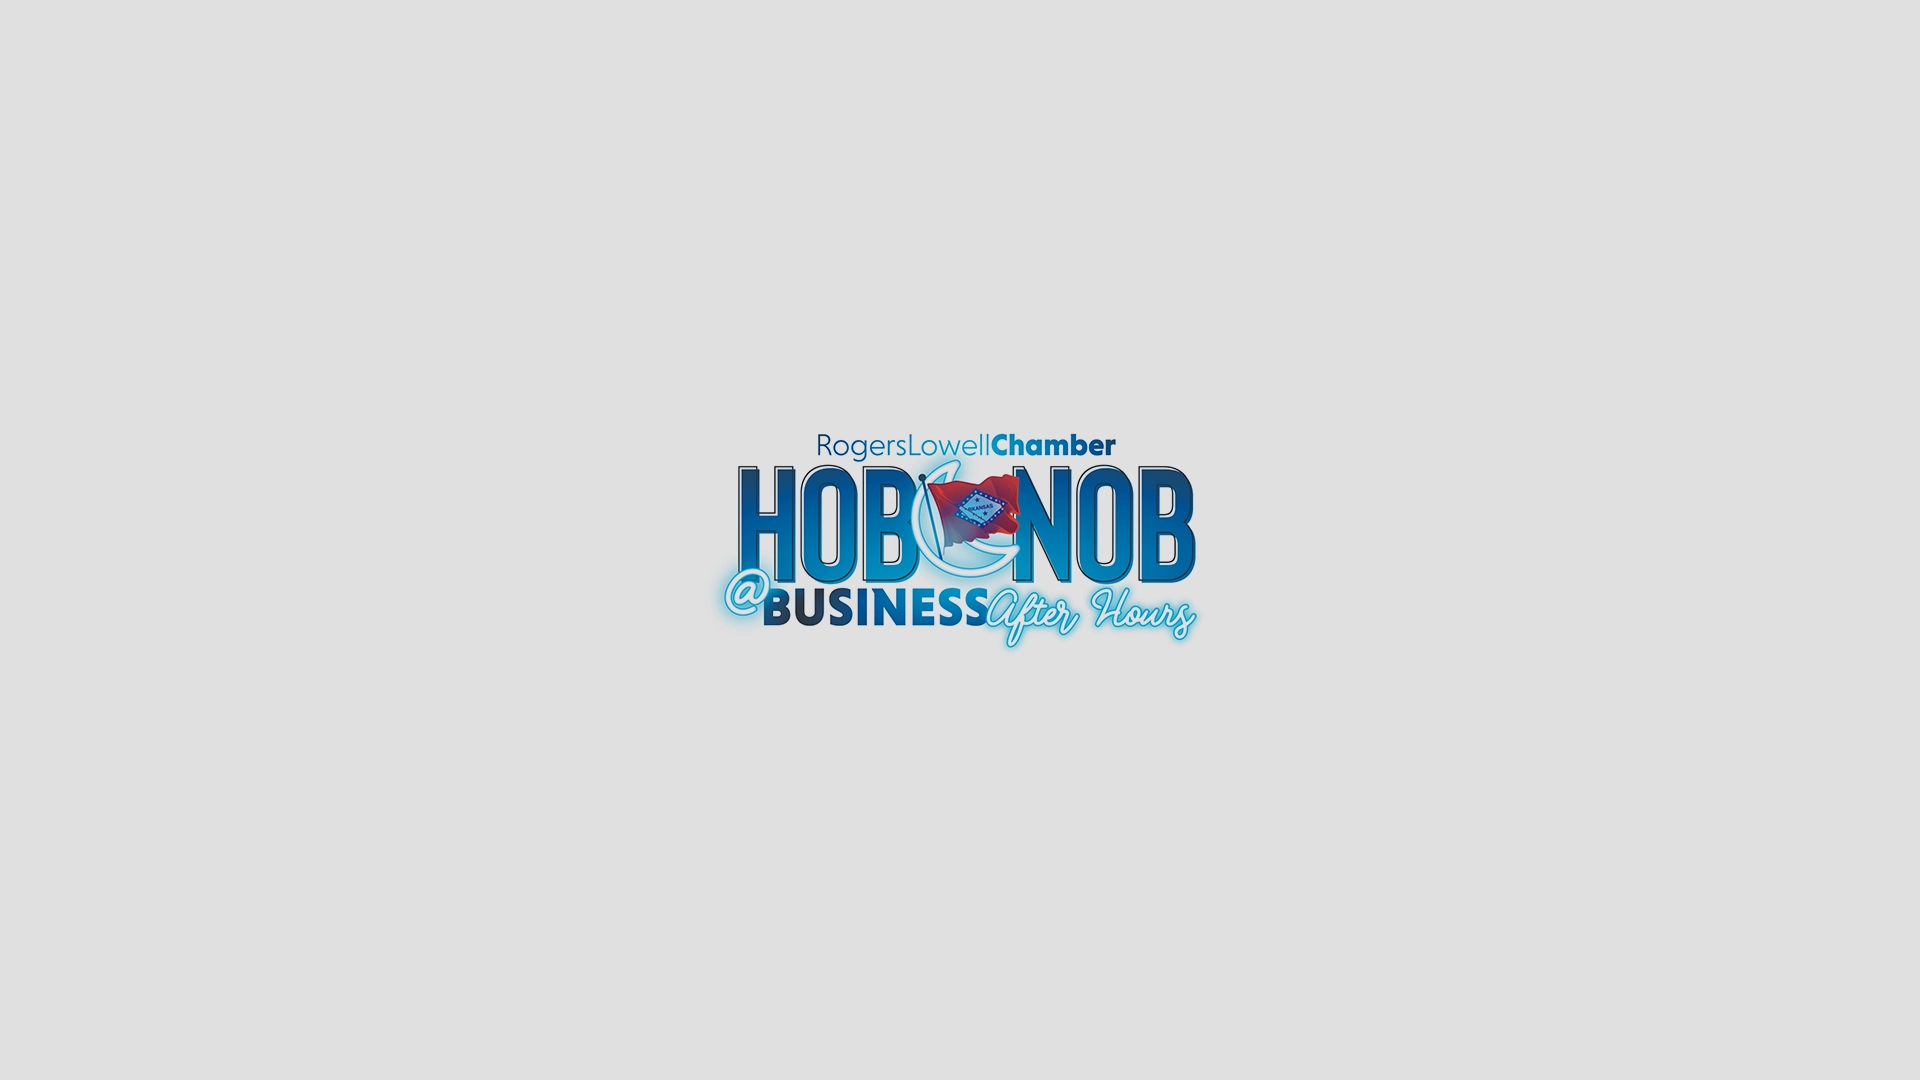 Hob Nob at Business After Hours